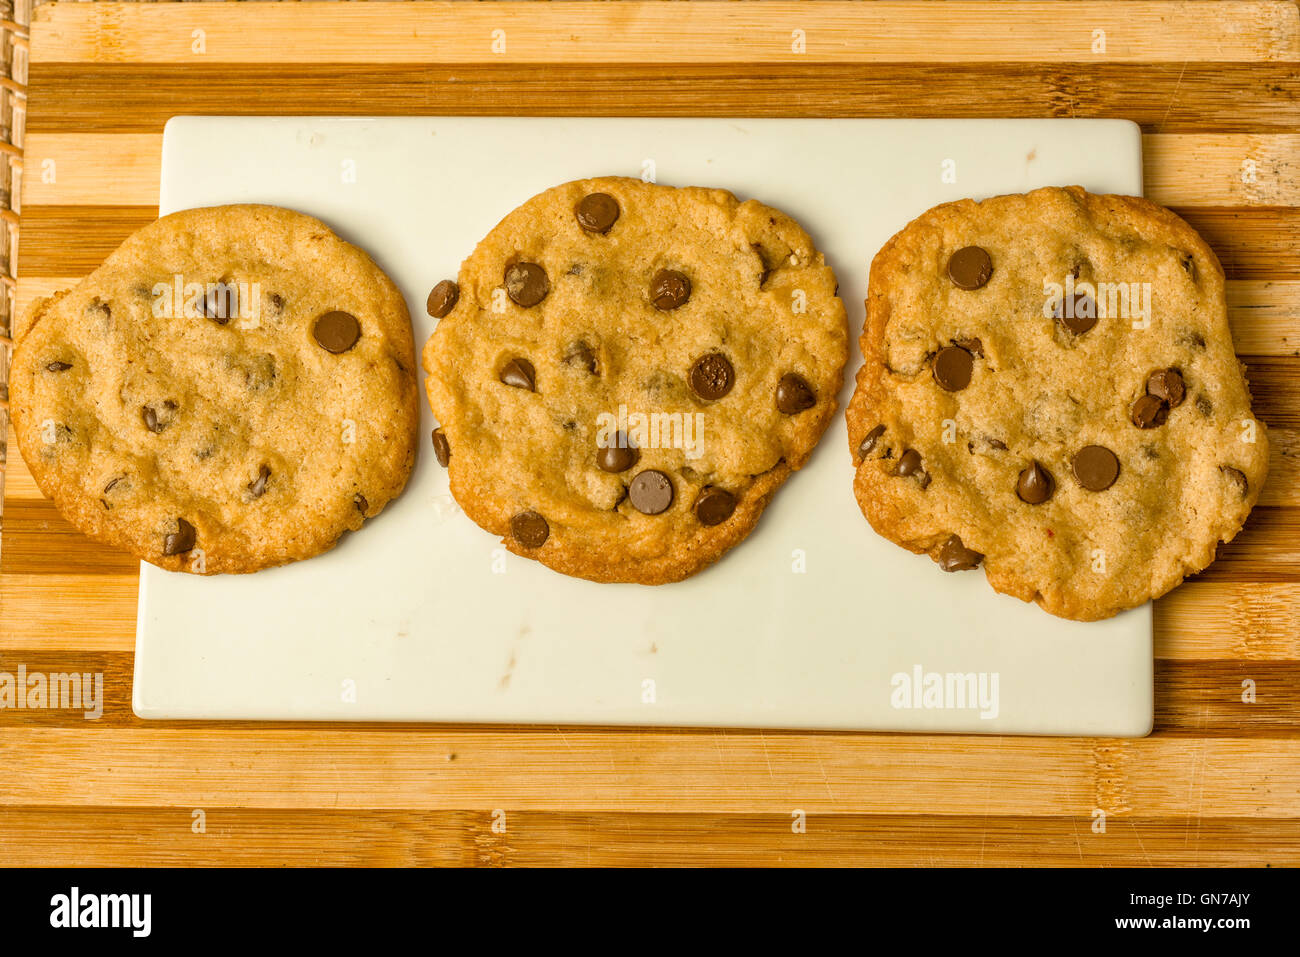 Vegan Chocolate Chips Cookies on a plate Stock Photo